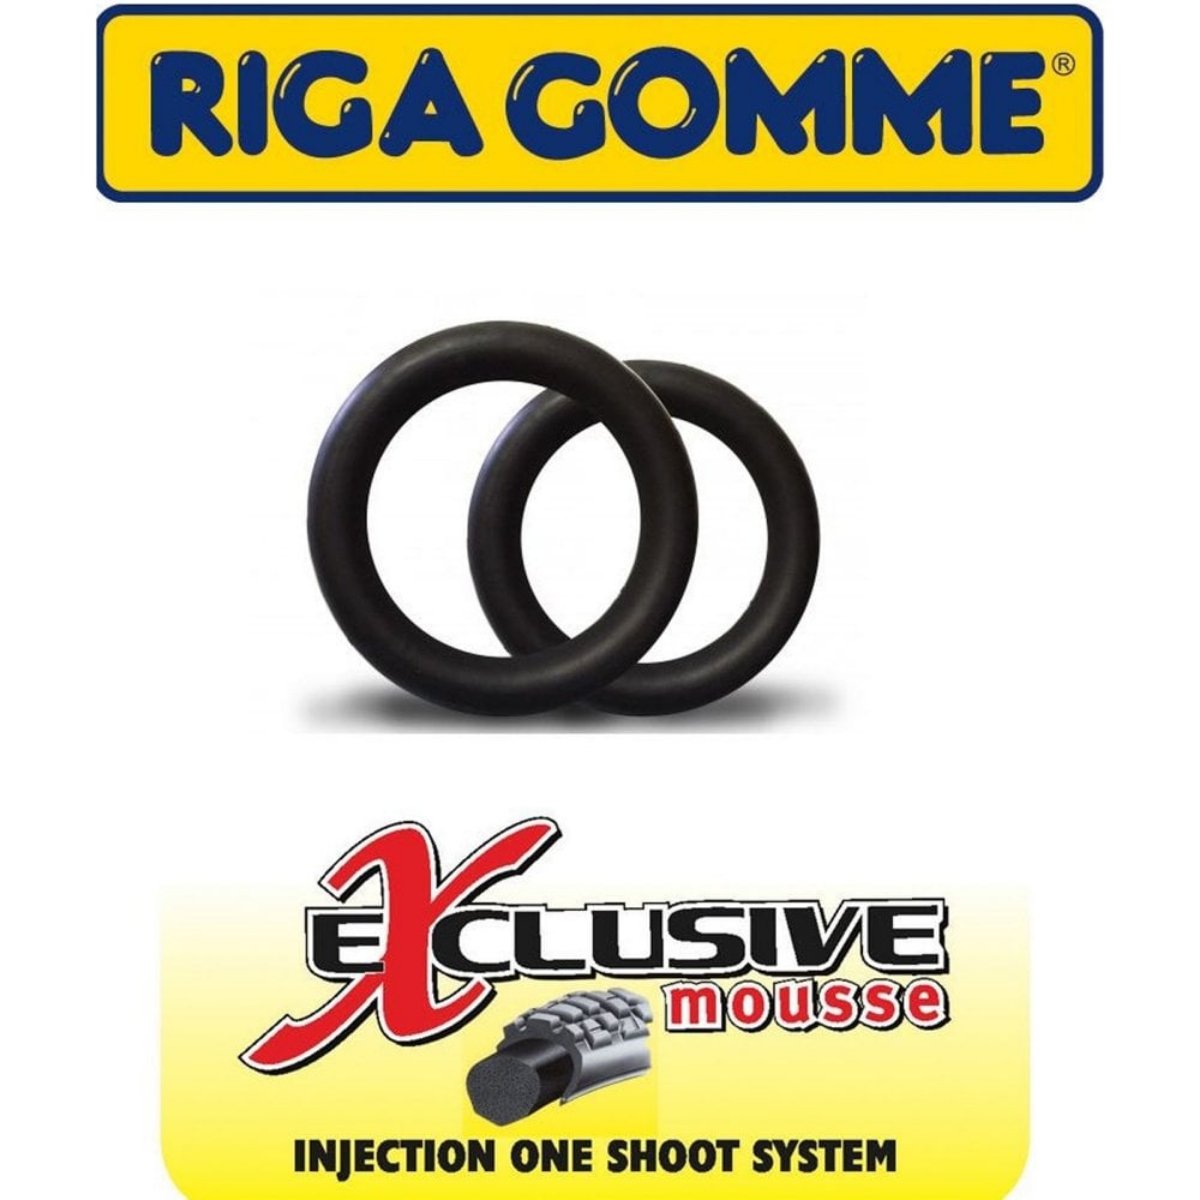 Riga Gomme Exclusive Mousse 140/80-18 - Riga Gomme